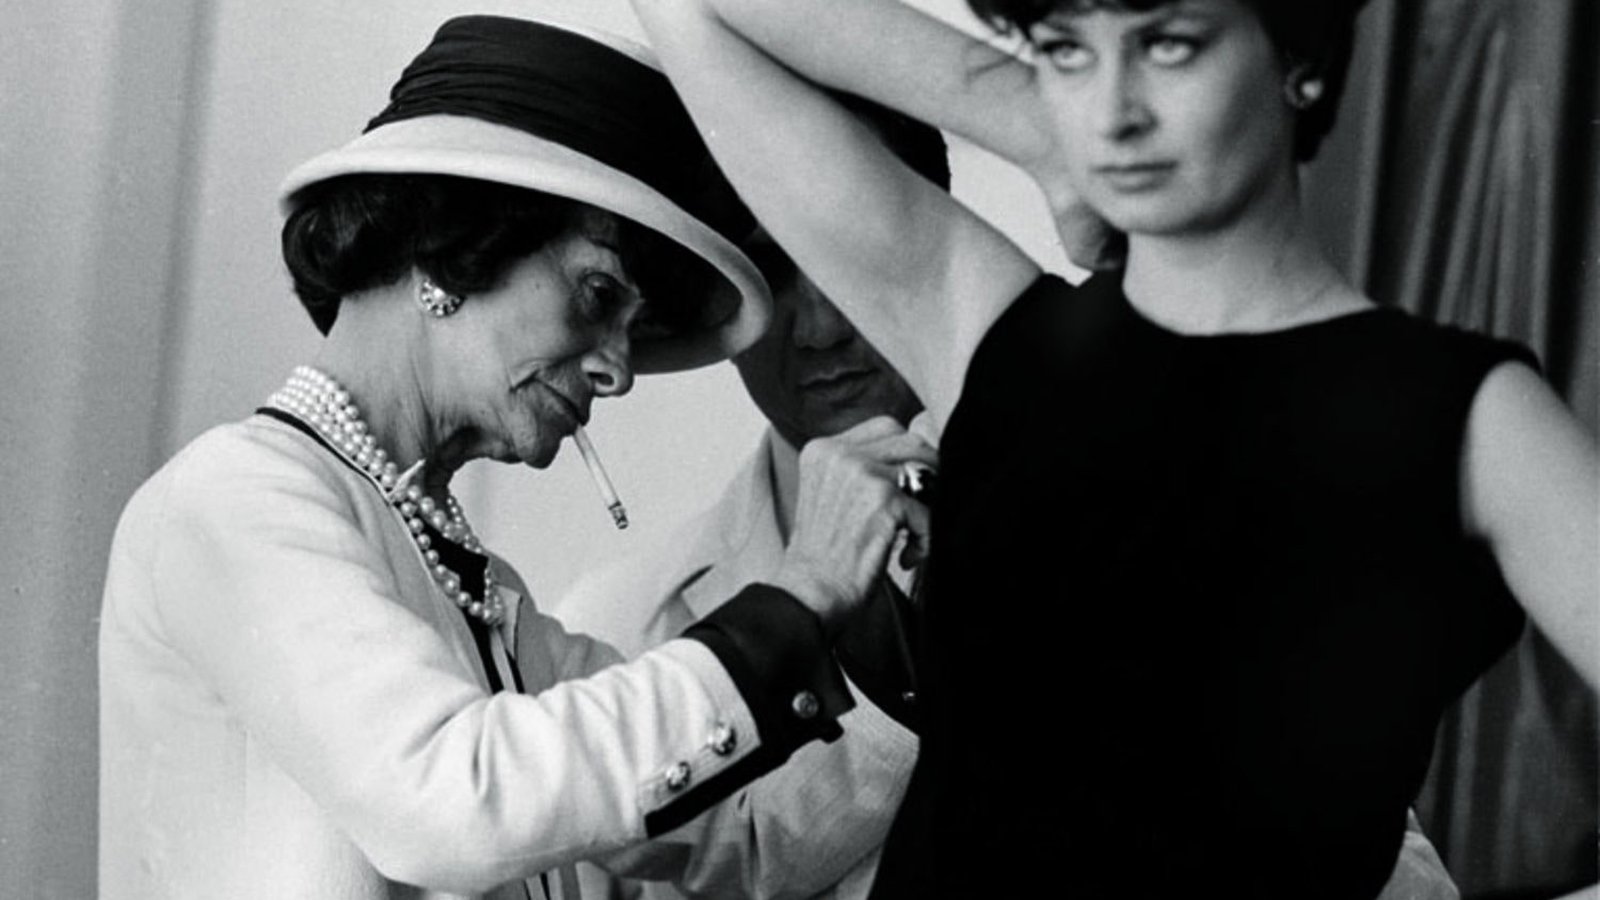 TV tonight: the fascinating story about Coco Chanel's mysterious